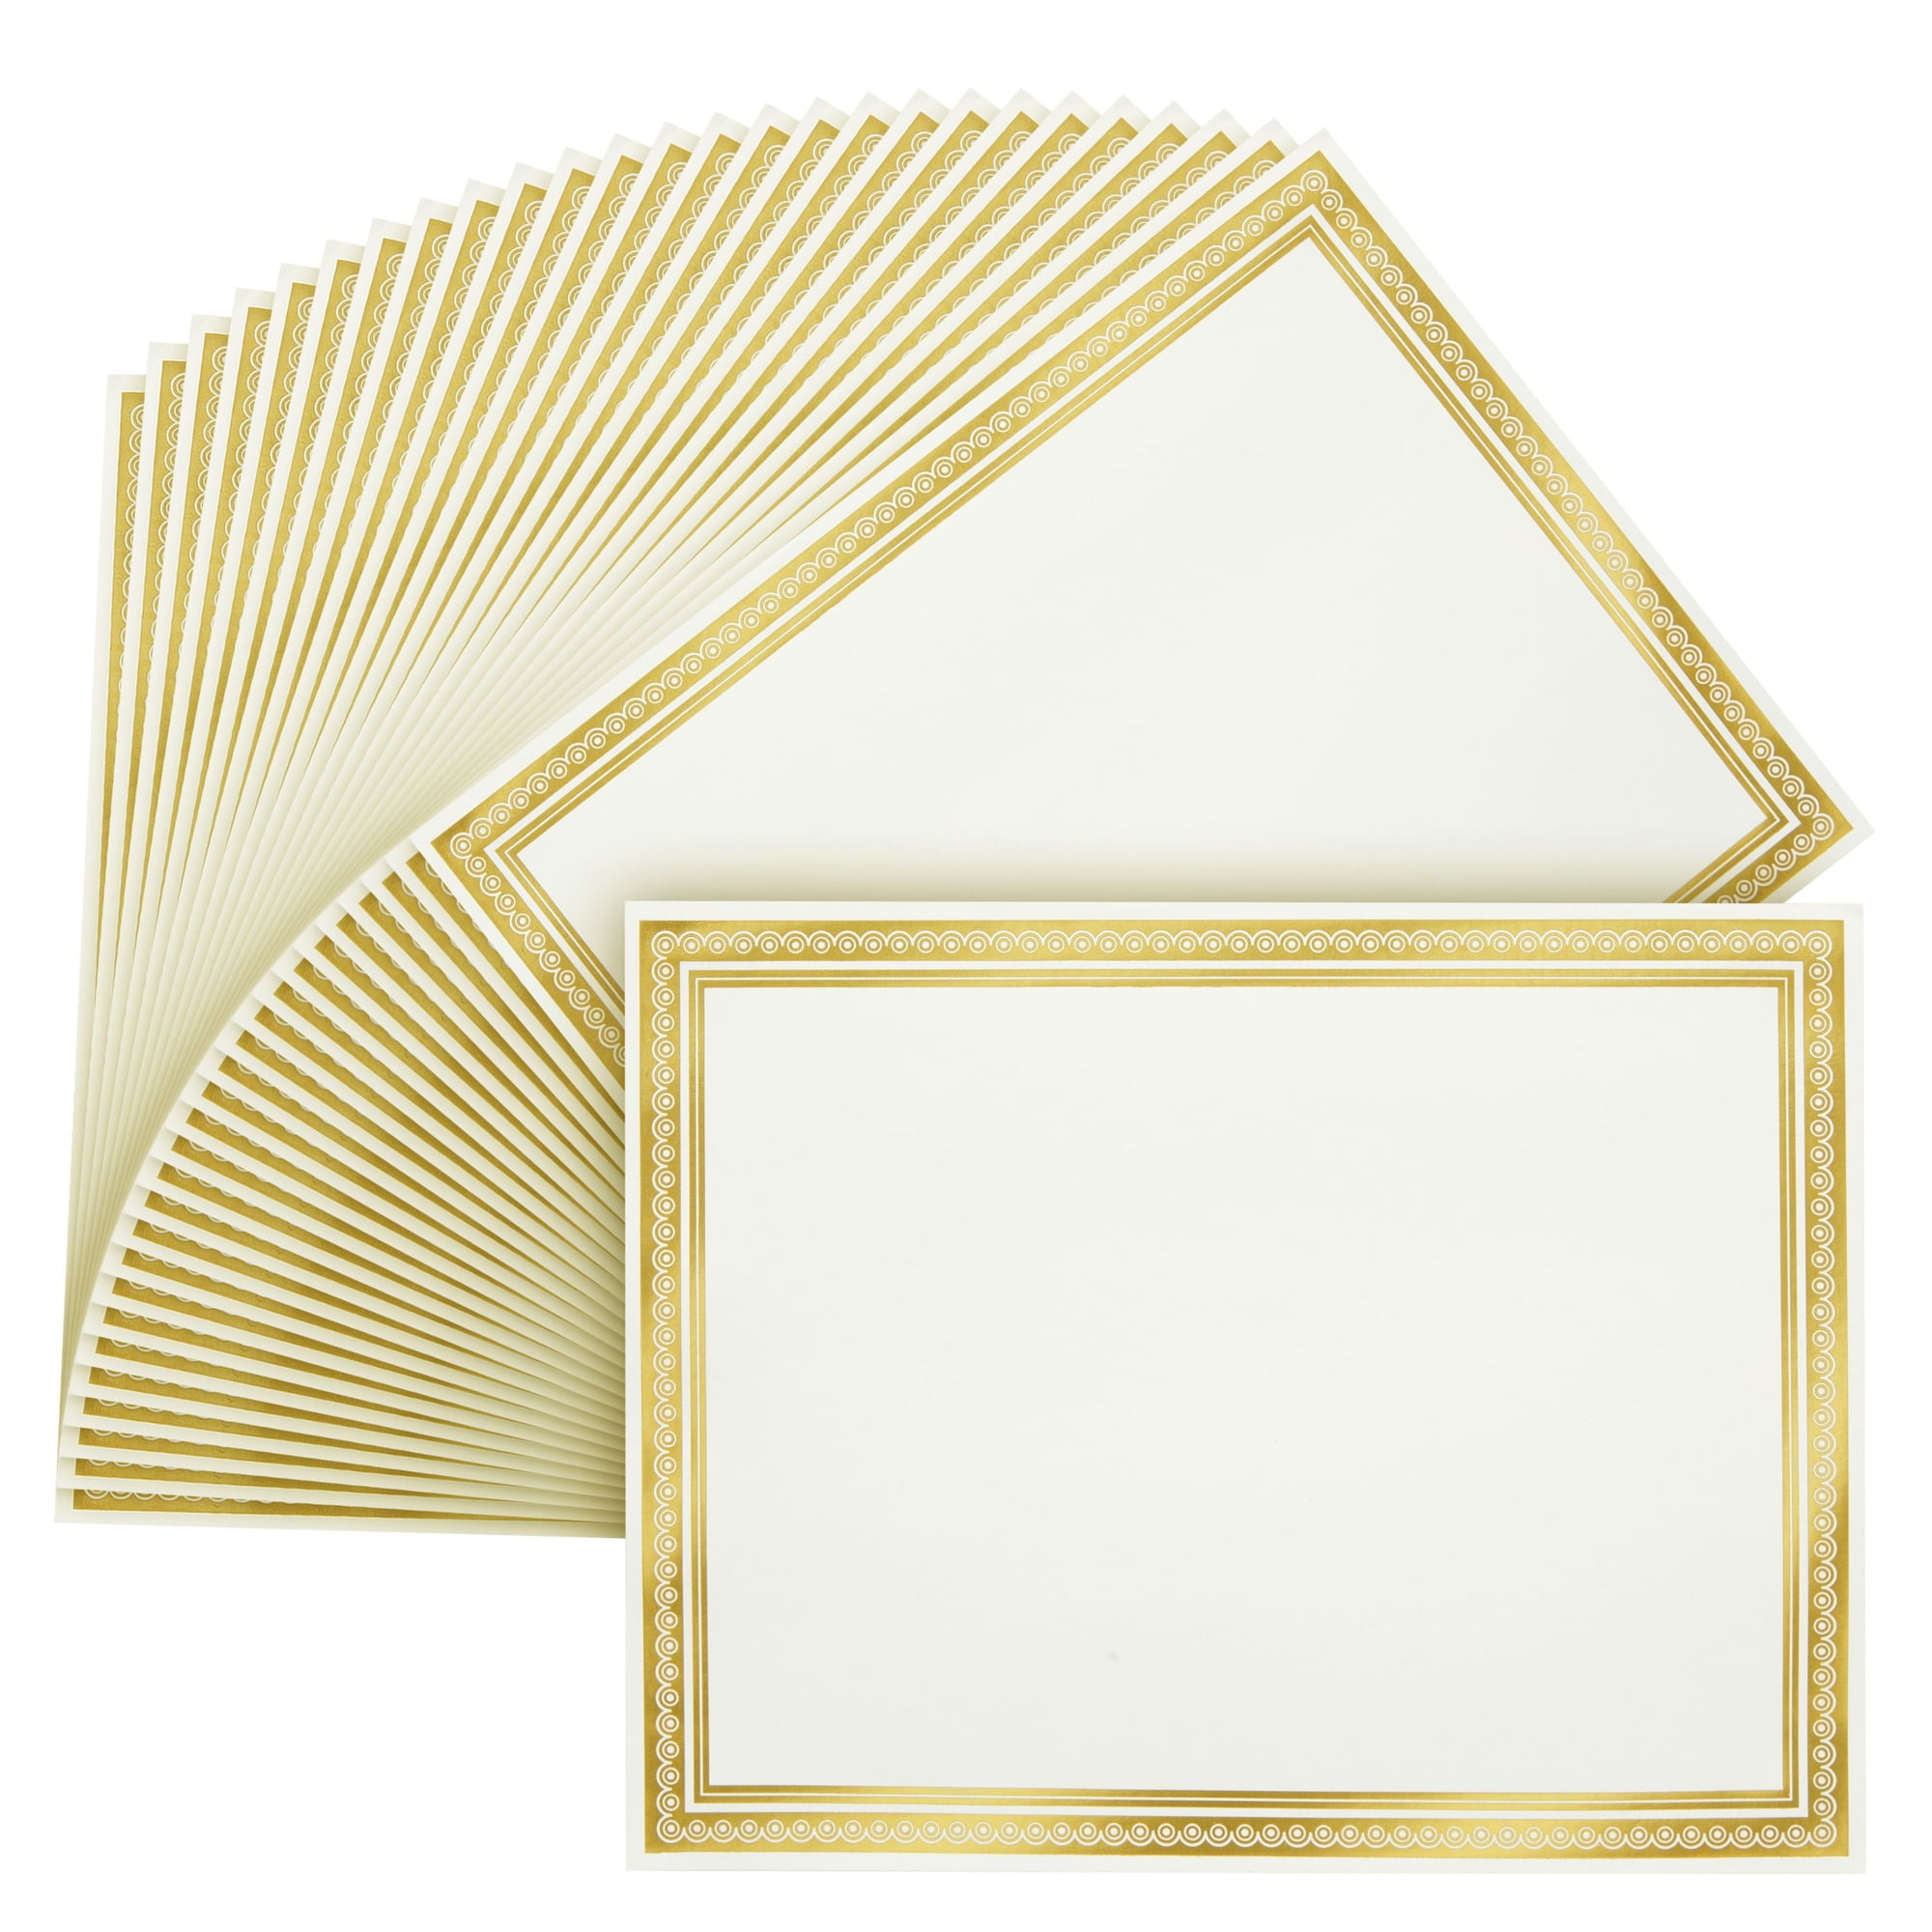  WOFASHPURET 30PCS Diploma Certificate Paper A4 Printer Paper  gold foil certificate paper Class Certificate Paper letter blank paper A4  Paper gold printer paper office old fashioned No words : Office